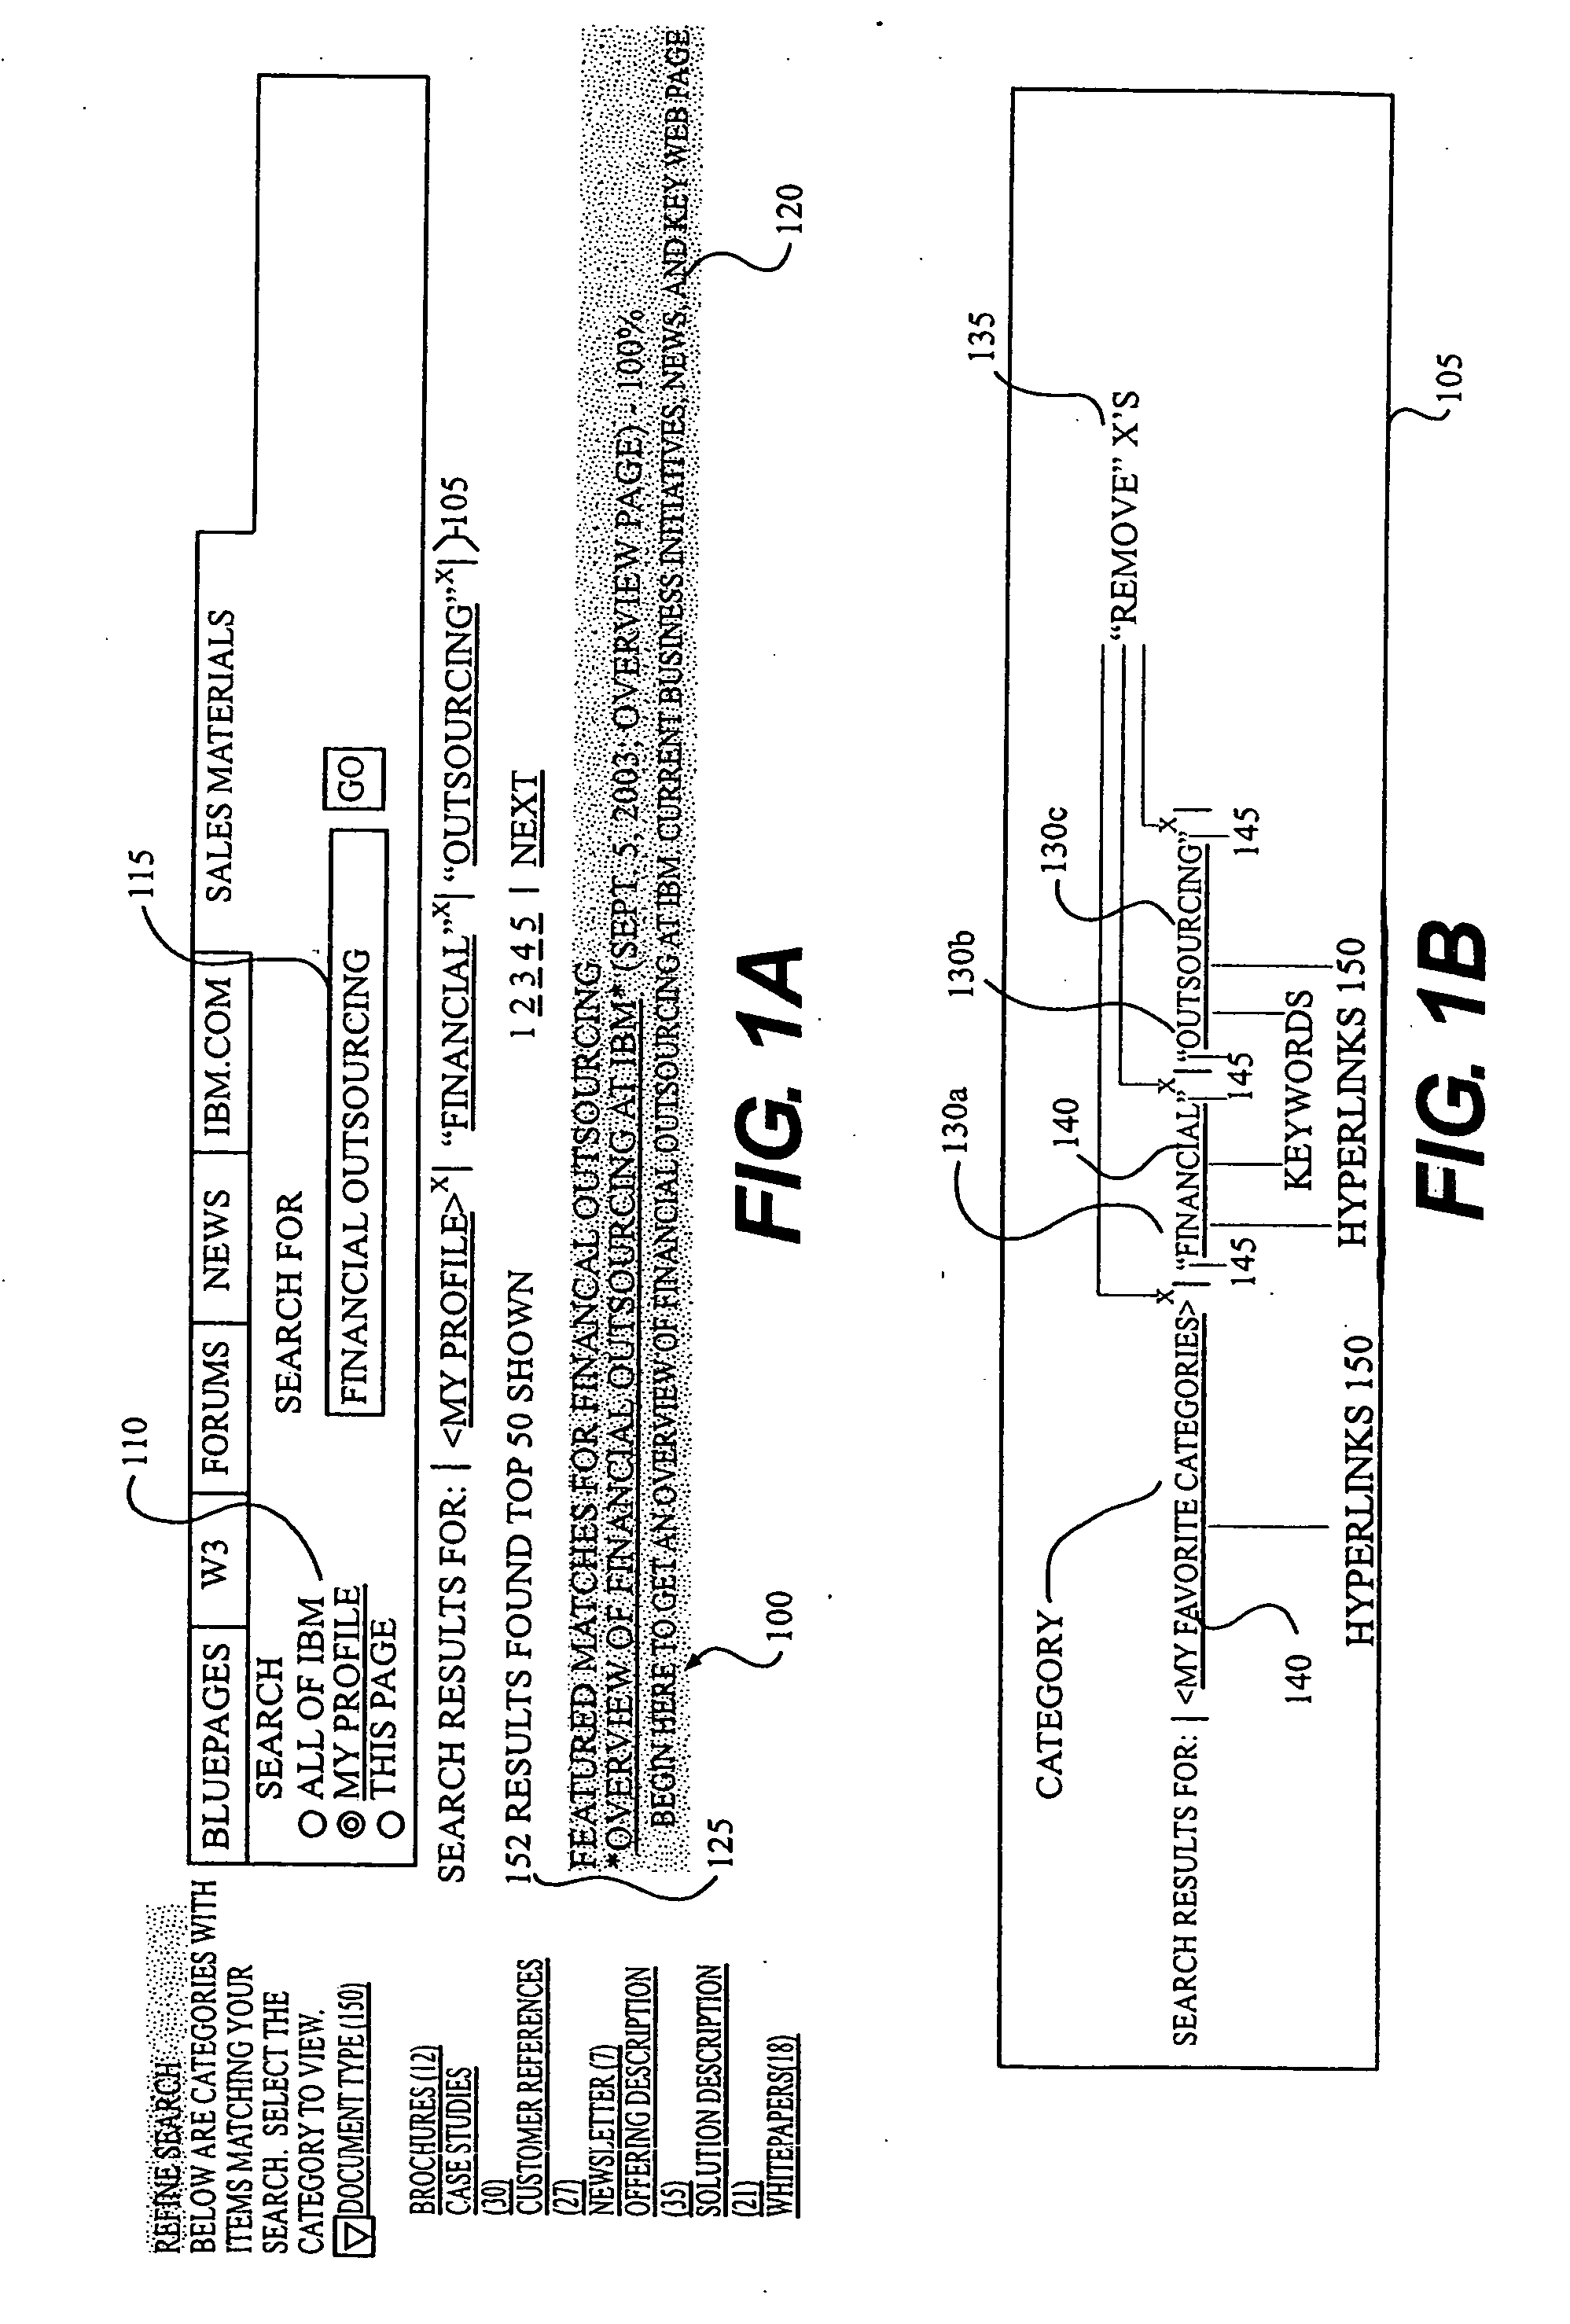 Search criteria control system and method